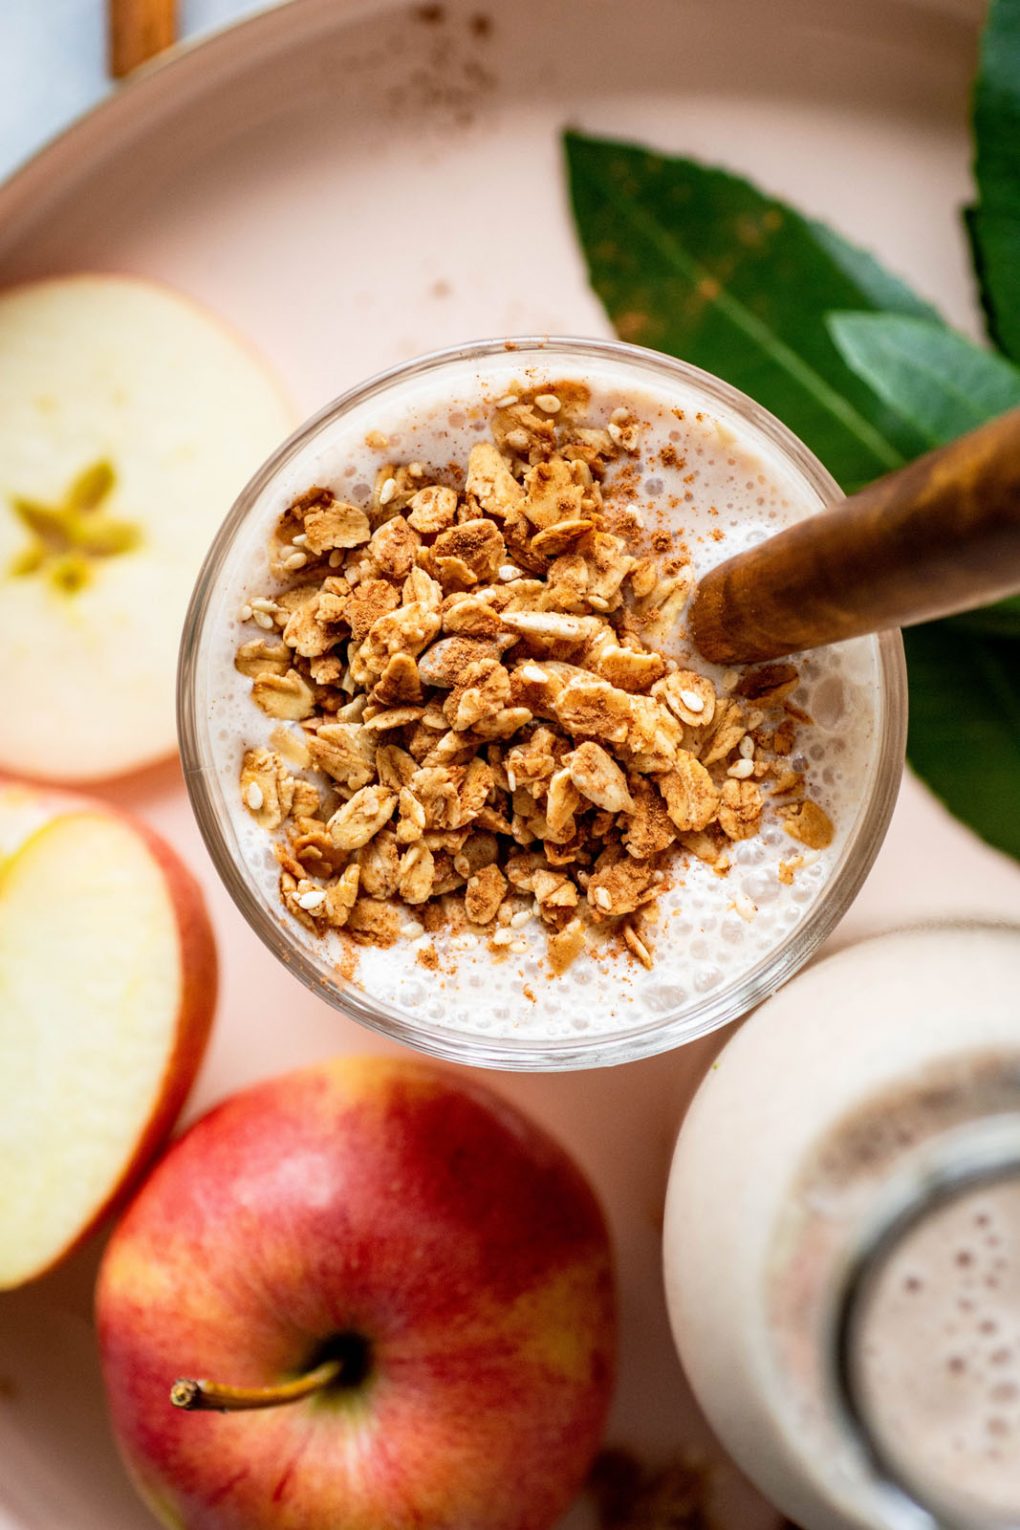 Close up over head shot of a glass full of cinnamon apple pie smoothie with a wooden handled spoon. Sitting in a gold rimmed round serving tray surrounded by apples, scattered granola, greenery, and cinnamon sticks.